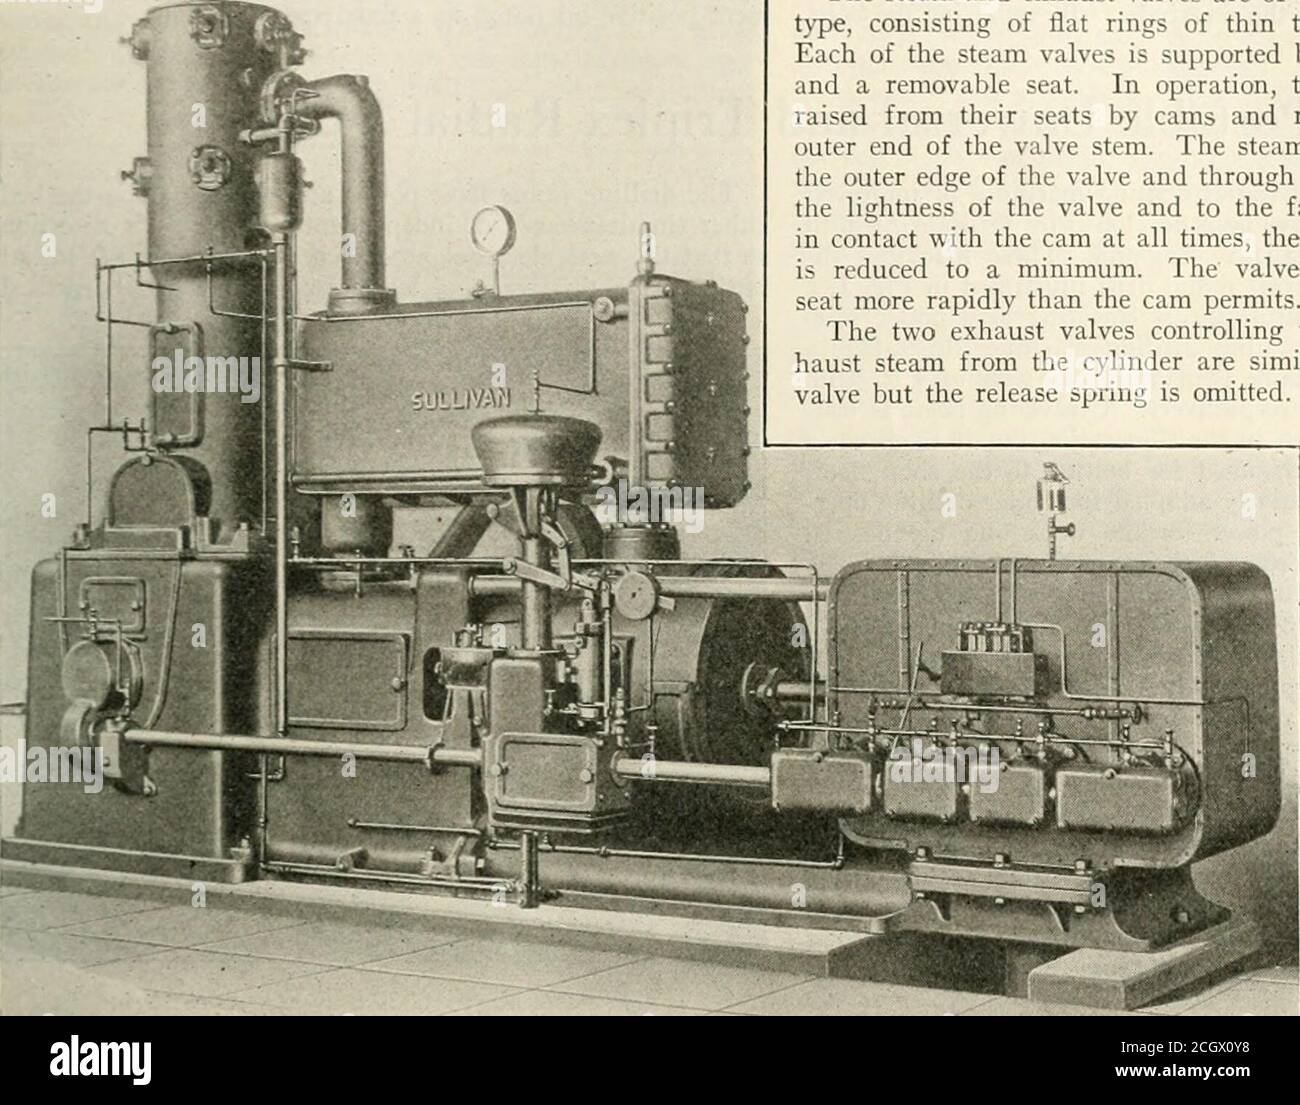 . Railway mechanical engineer . past ten years.The steam valve gear side of the machine is illustrated in Fig. 1 which shows the single high duty steam cylinderplaced in the rear of and in tandem with the low pressureair cylinder, the high pressure air cylinder being in a verticalplane. A heavy fly wheel, better shown in Fig. 2, is mountedon one end of the crank shaft so as to impart a smoothand even motion to the machine. A single crank pin drivesboth low pressure and high pressure pistons. All movingparts of the compressor proper are provided with positiveautomatic lubrication. The low press Stock Photo